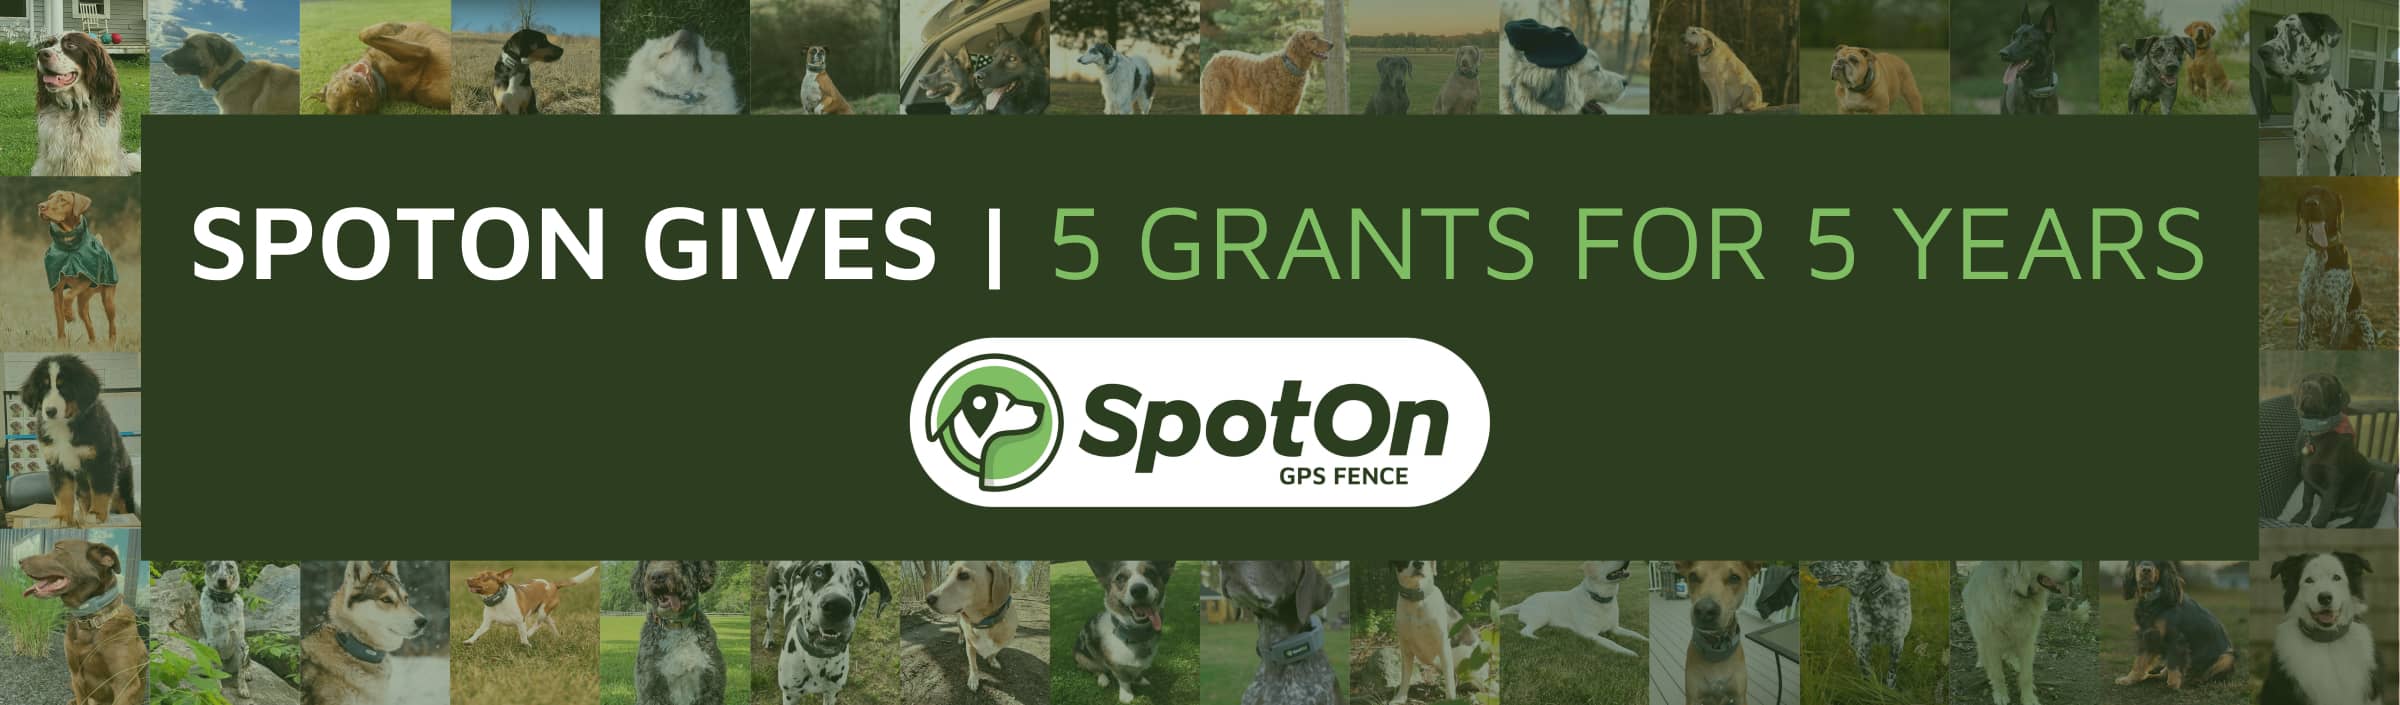 SpotOn Gives: Grants for 5 Years